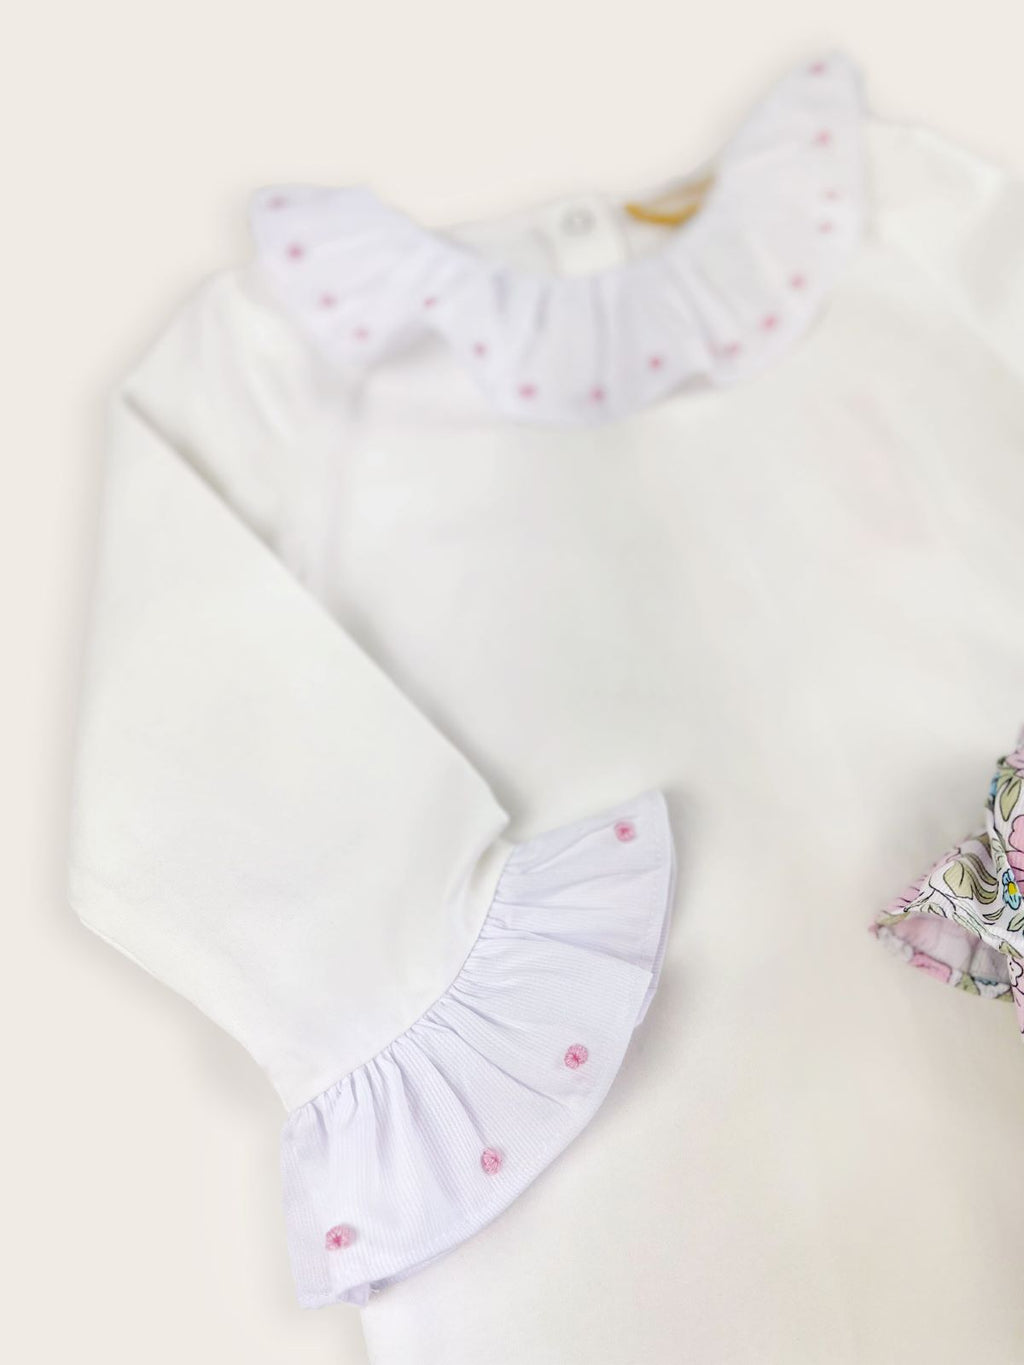 Pink dots embroidered onto the frilled collar and cuffs of a white bodysuit paired with floral bloomers.